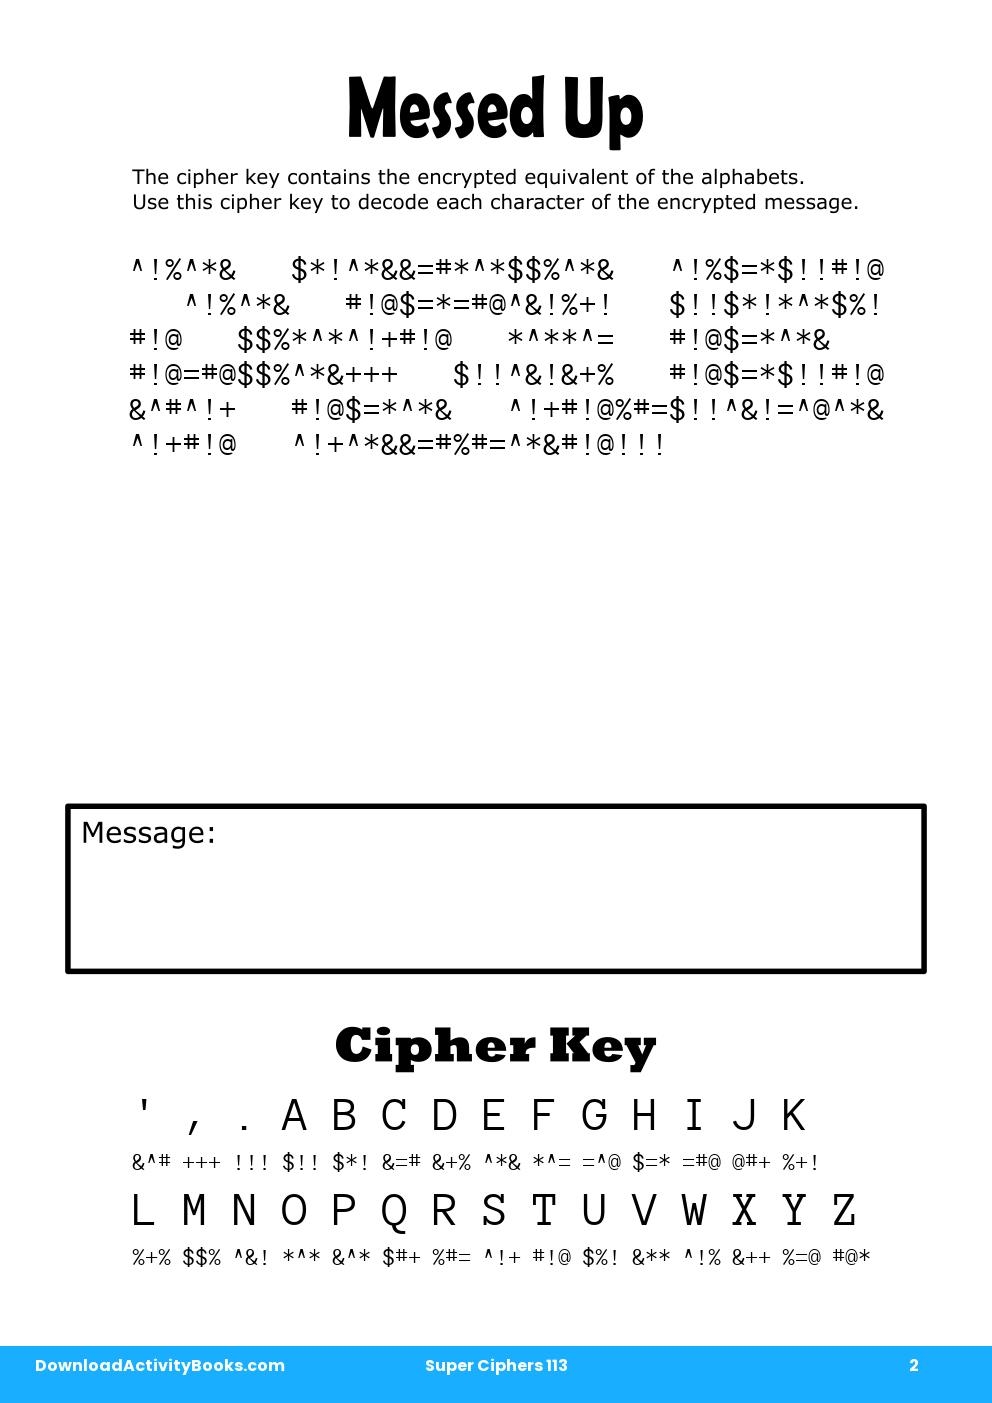 Messed Up in Super Ciphers 113